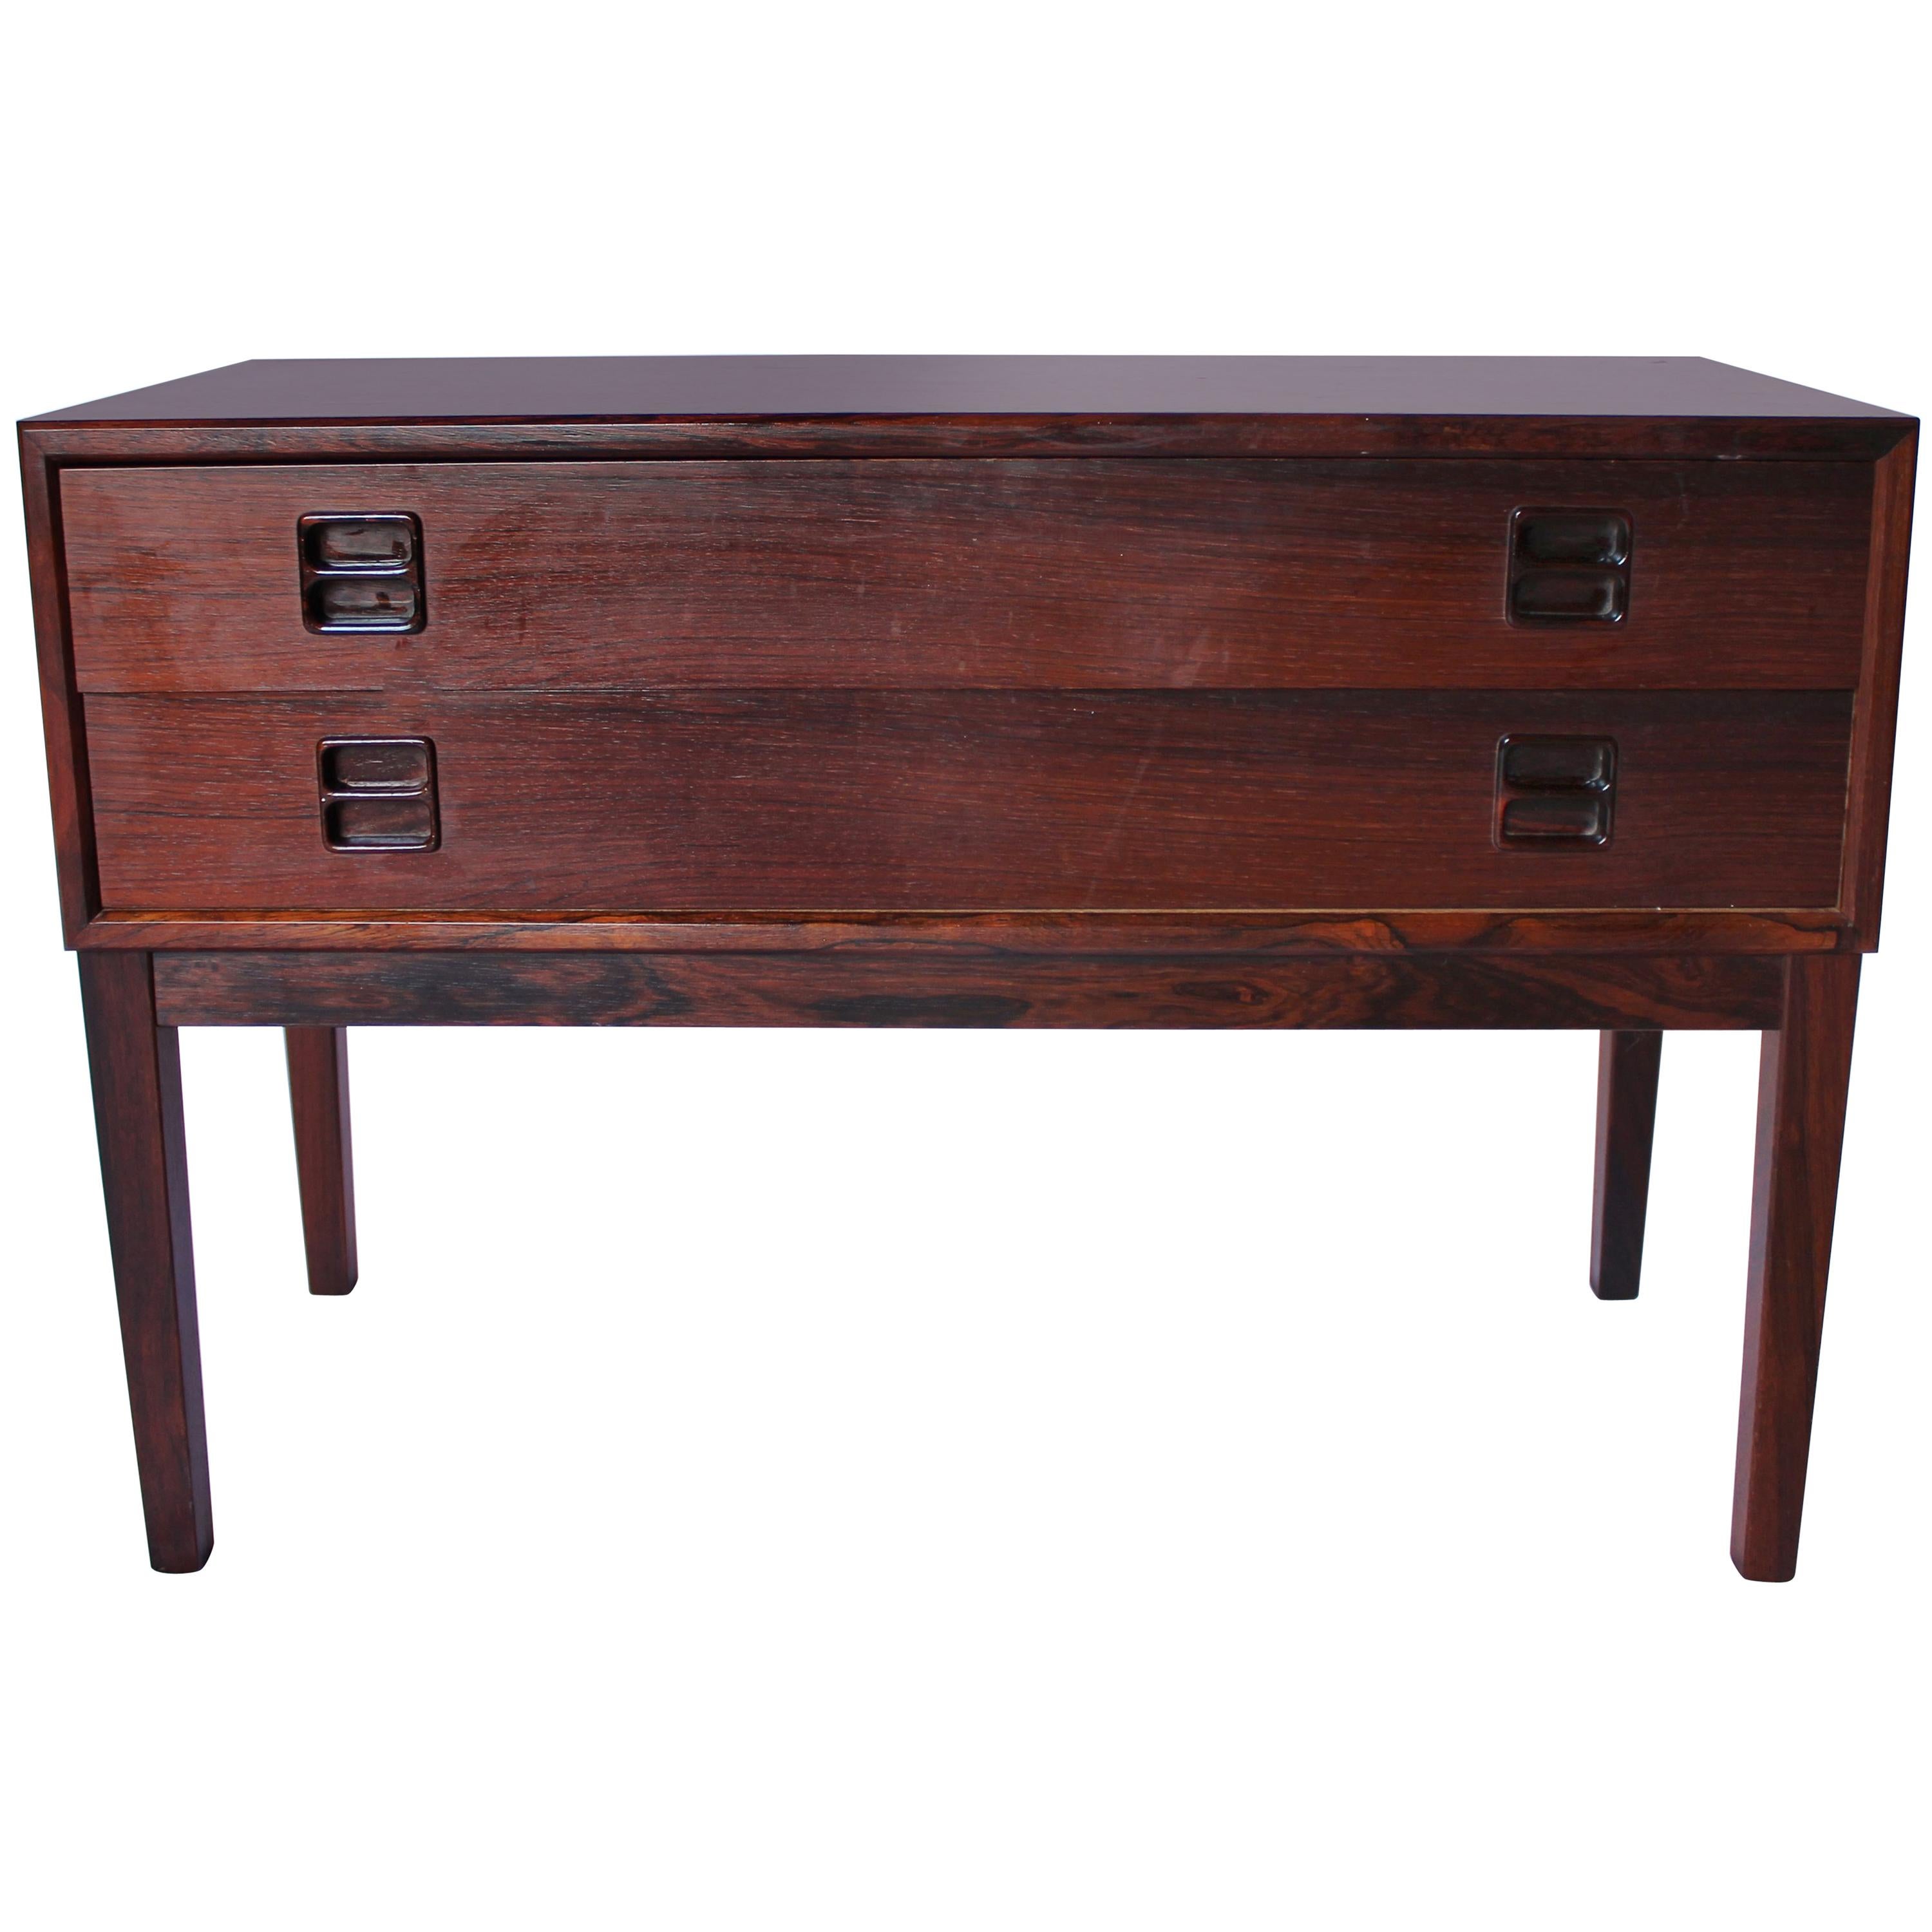 Smaller Dresser with Two Drawers in Rosewood of Danish Design from the 1960s For Sale